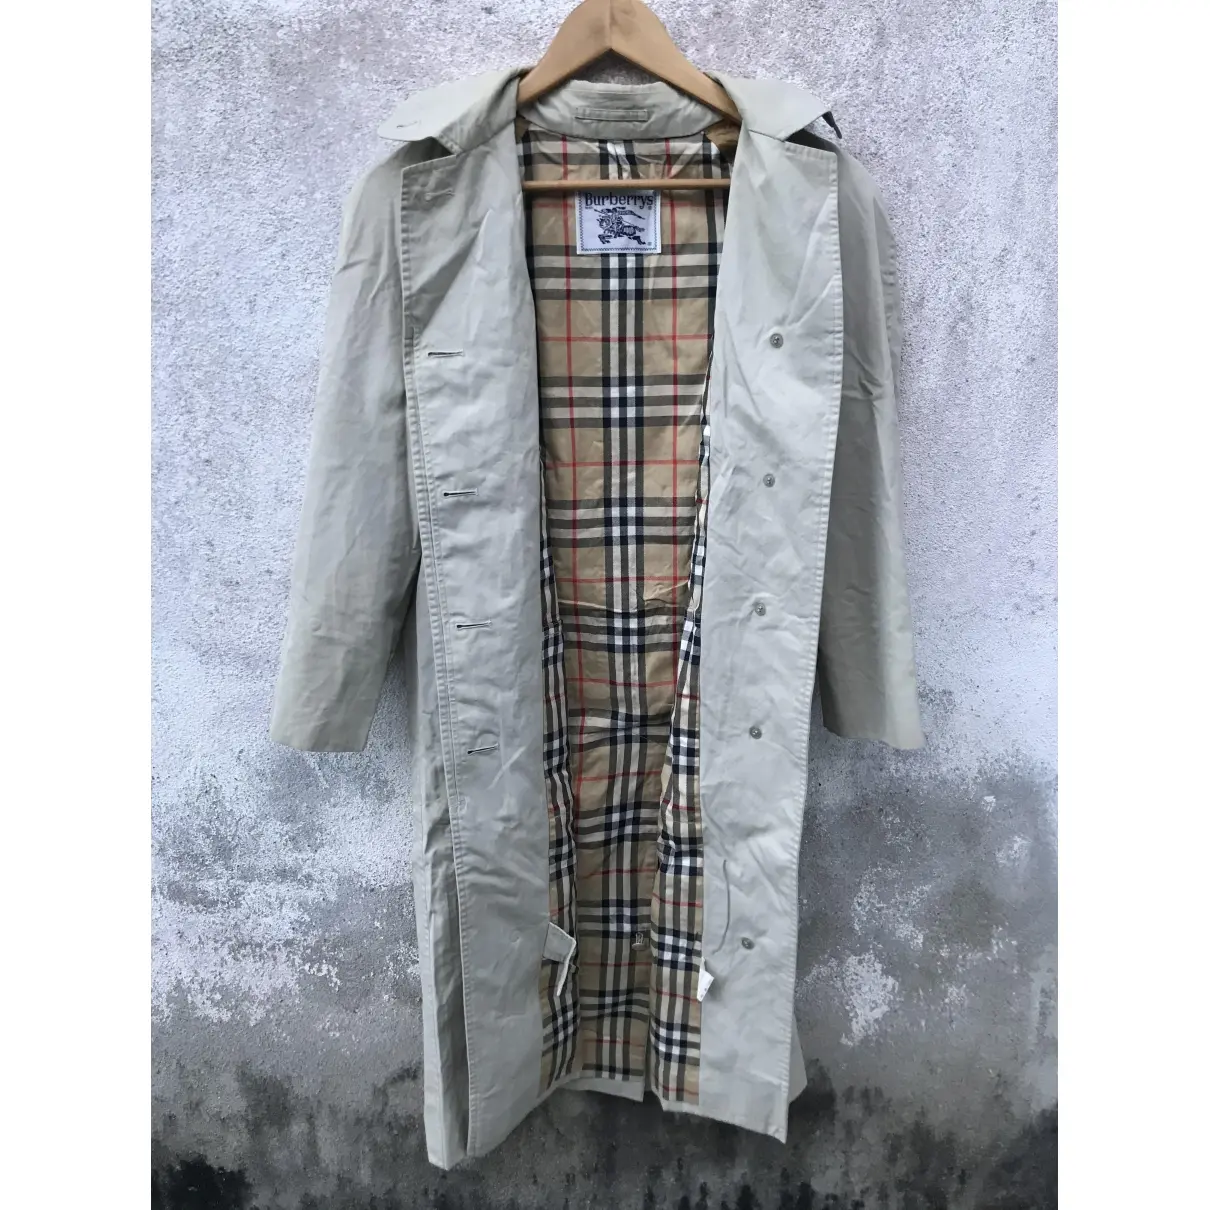 Burberry Trench coat for sale - Vintage